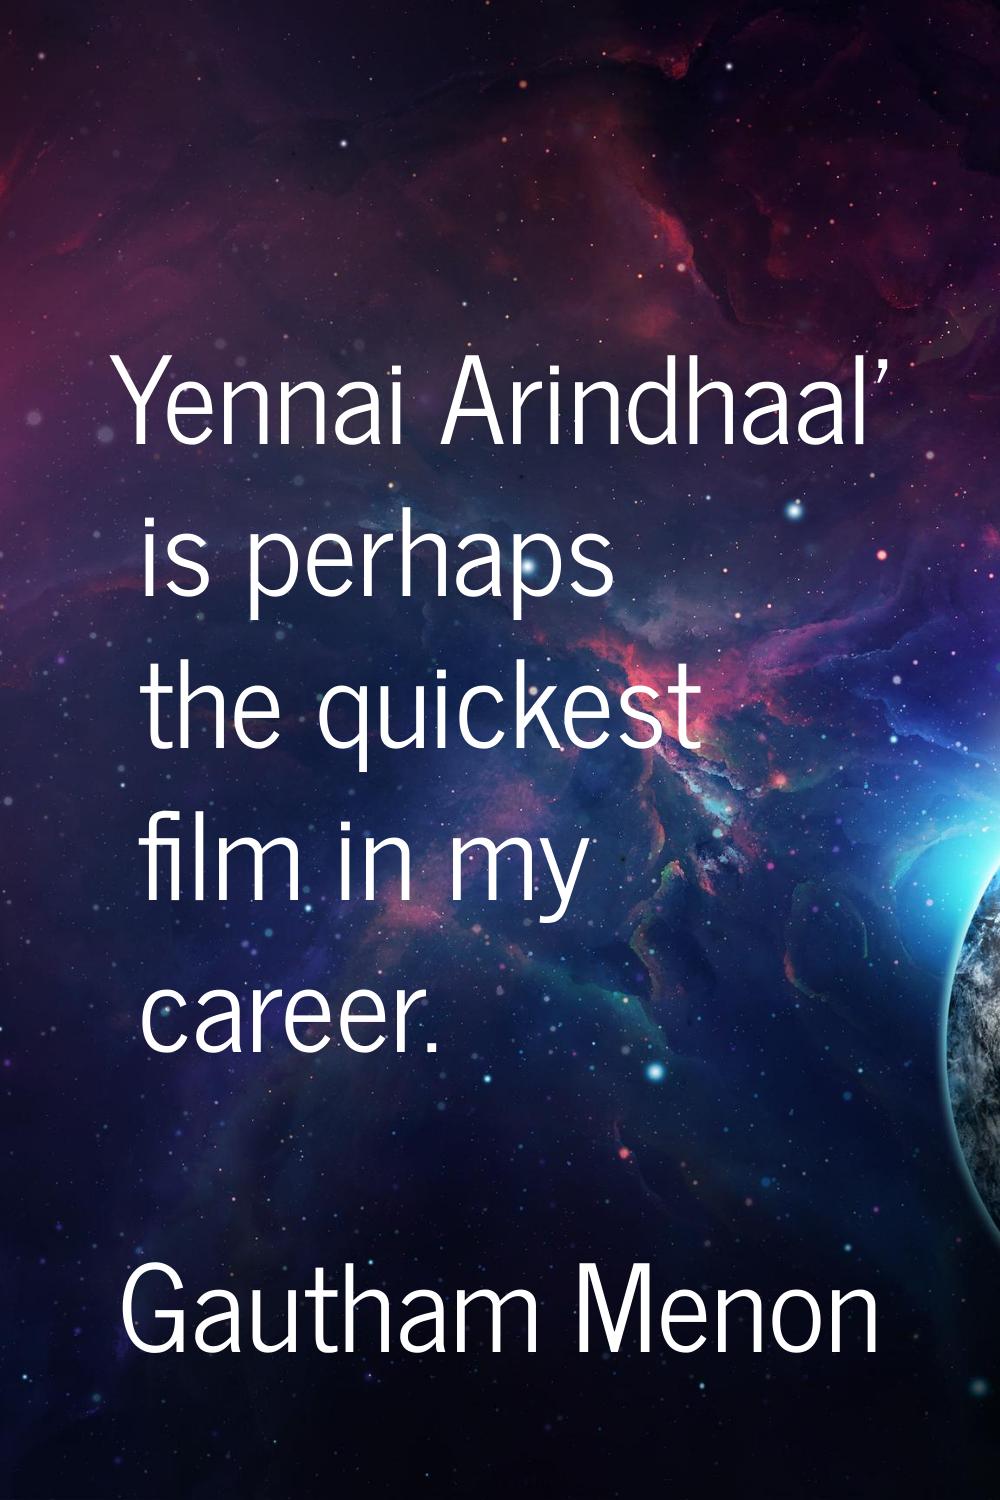 Yennai Arindhaal' is perhaps the quickest film in my career.